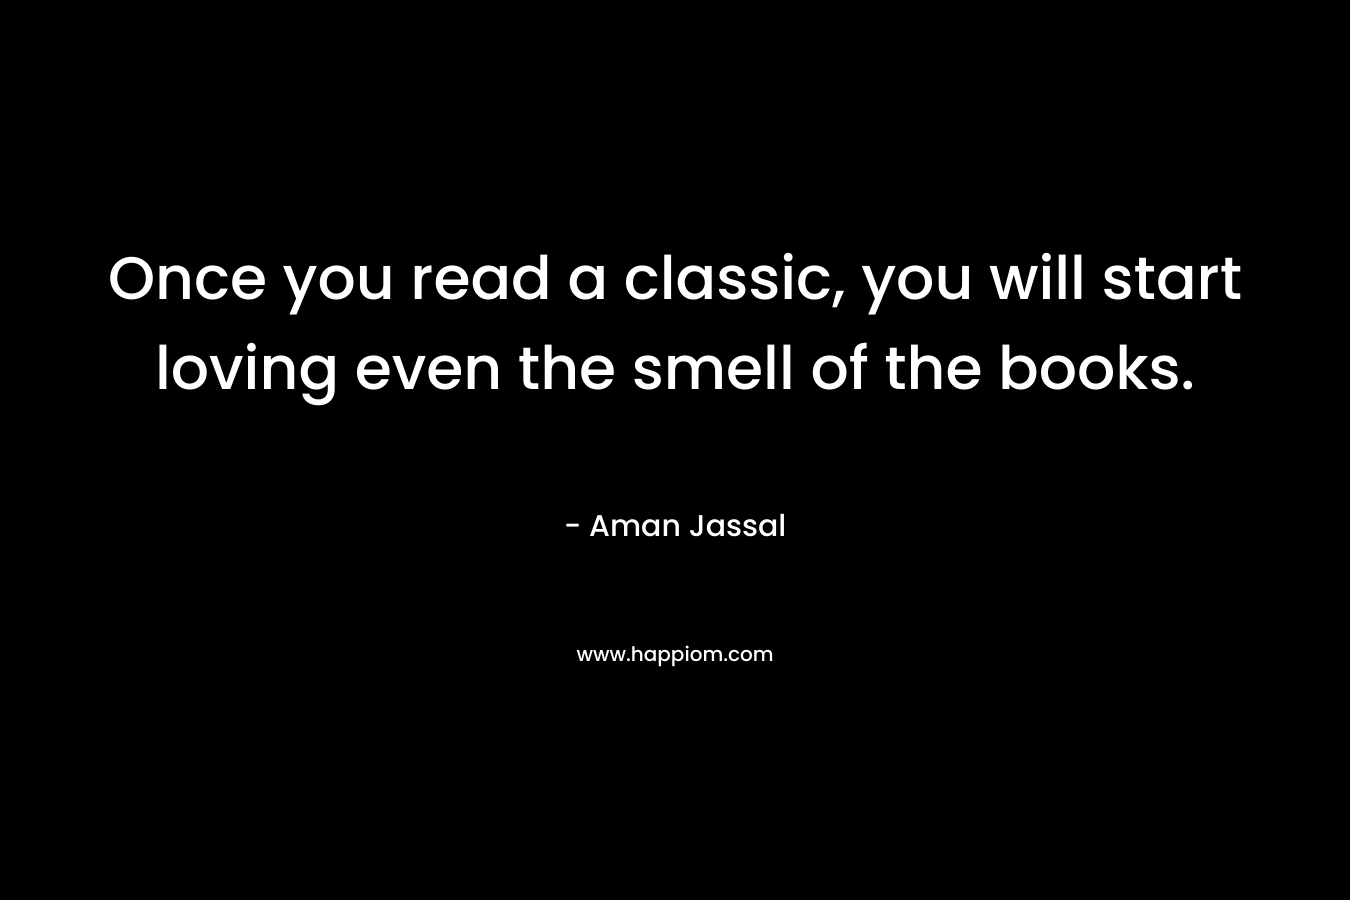 Once you read a classic, you will start loving even the smell of the books. – Aman Jassal